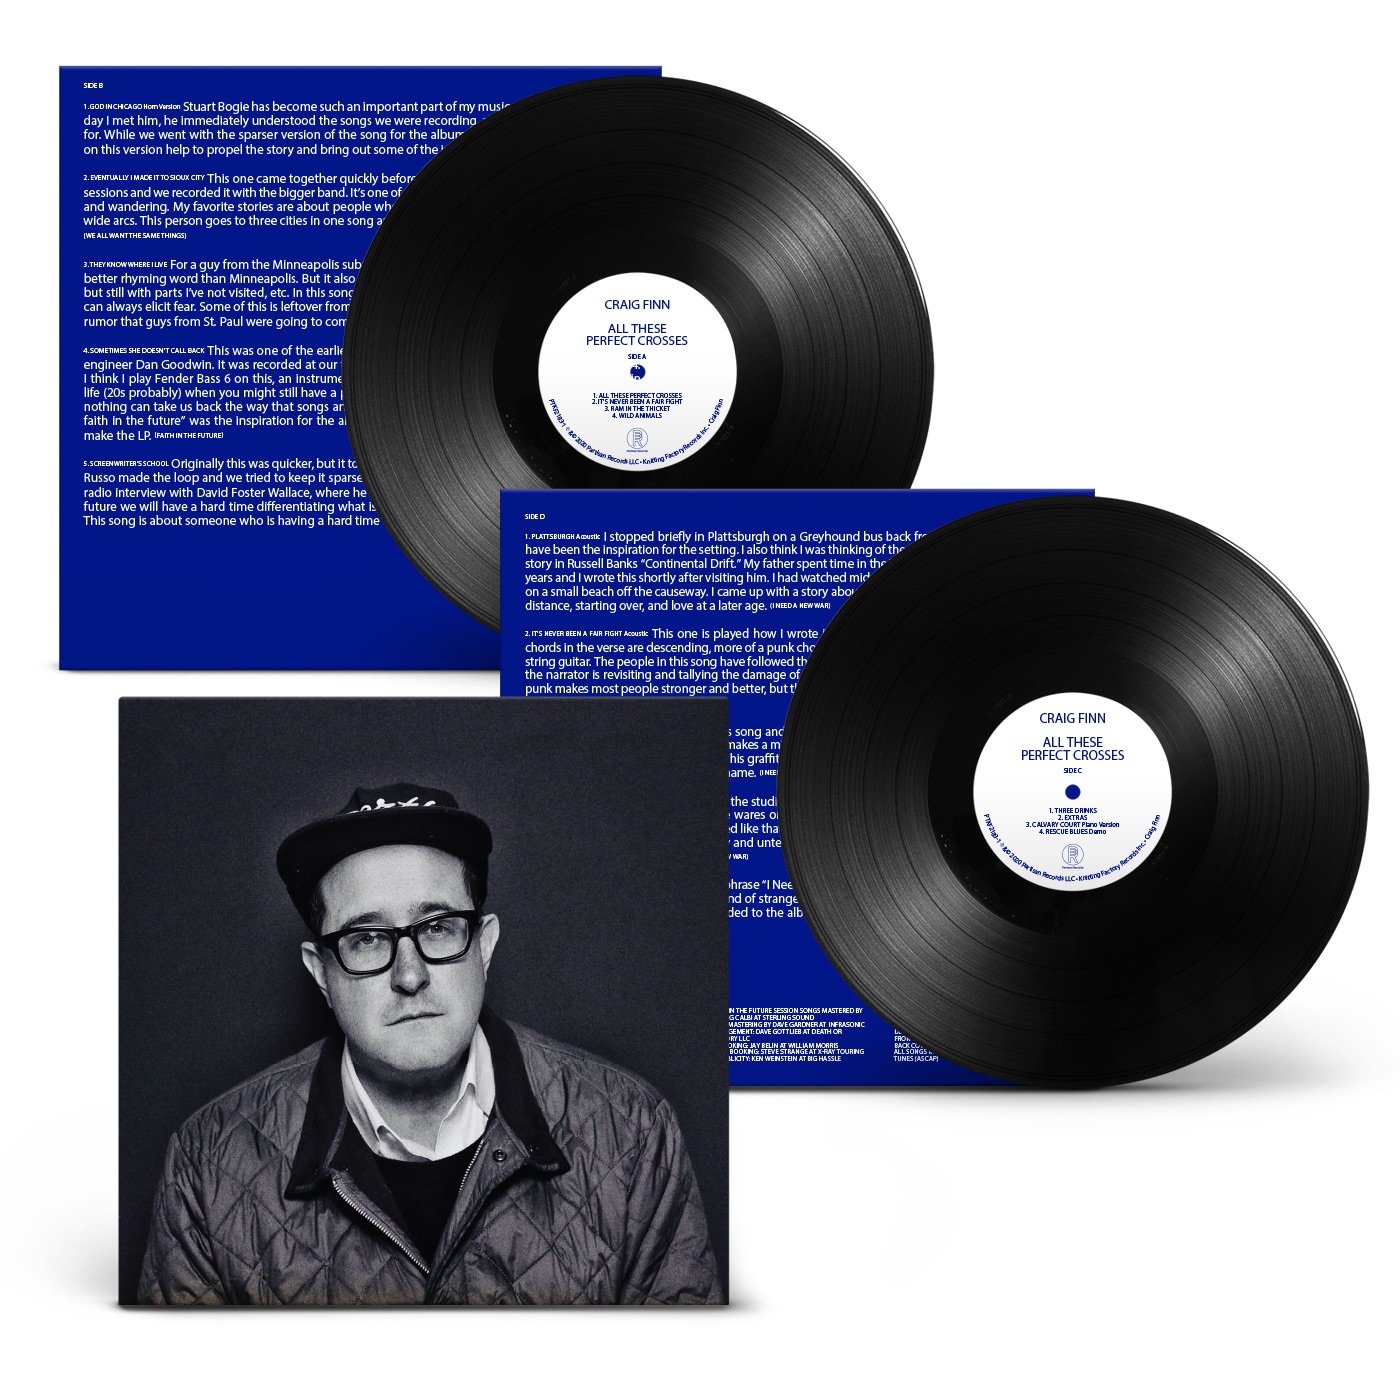 Craig Finn on X: Back from London! I wanted to tell you about All These  Perfect Crosses - 2xLP set out 4/18 for @recordstoreday via  @partisanrecords. All songs I really love, they